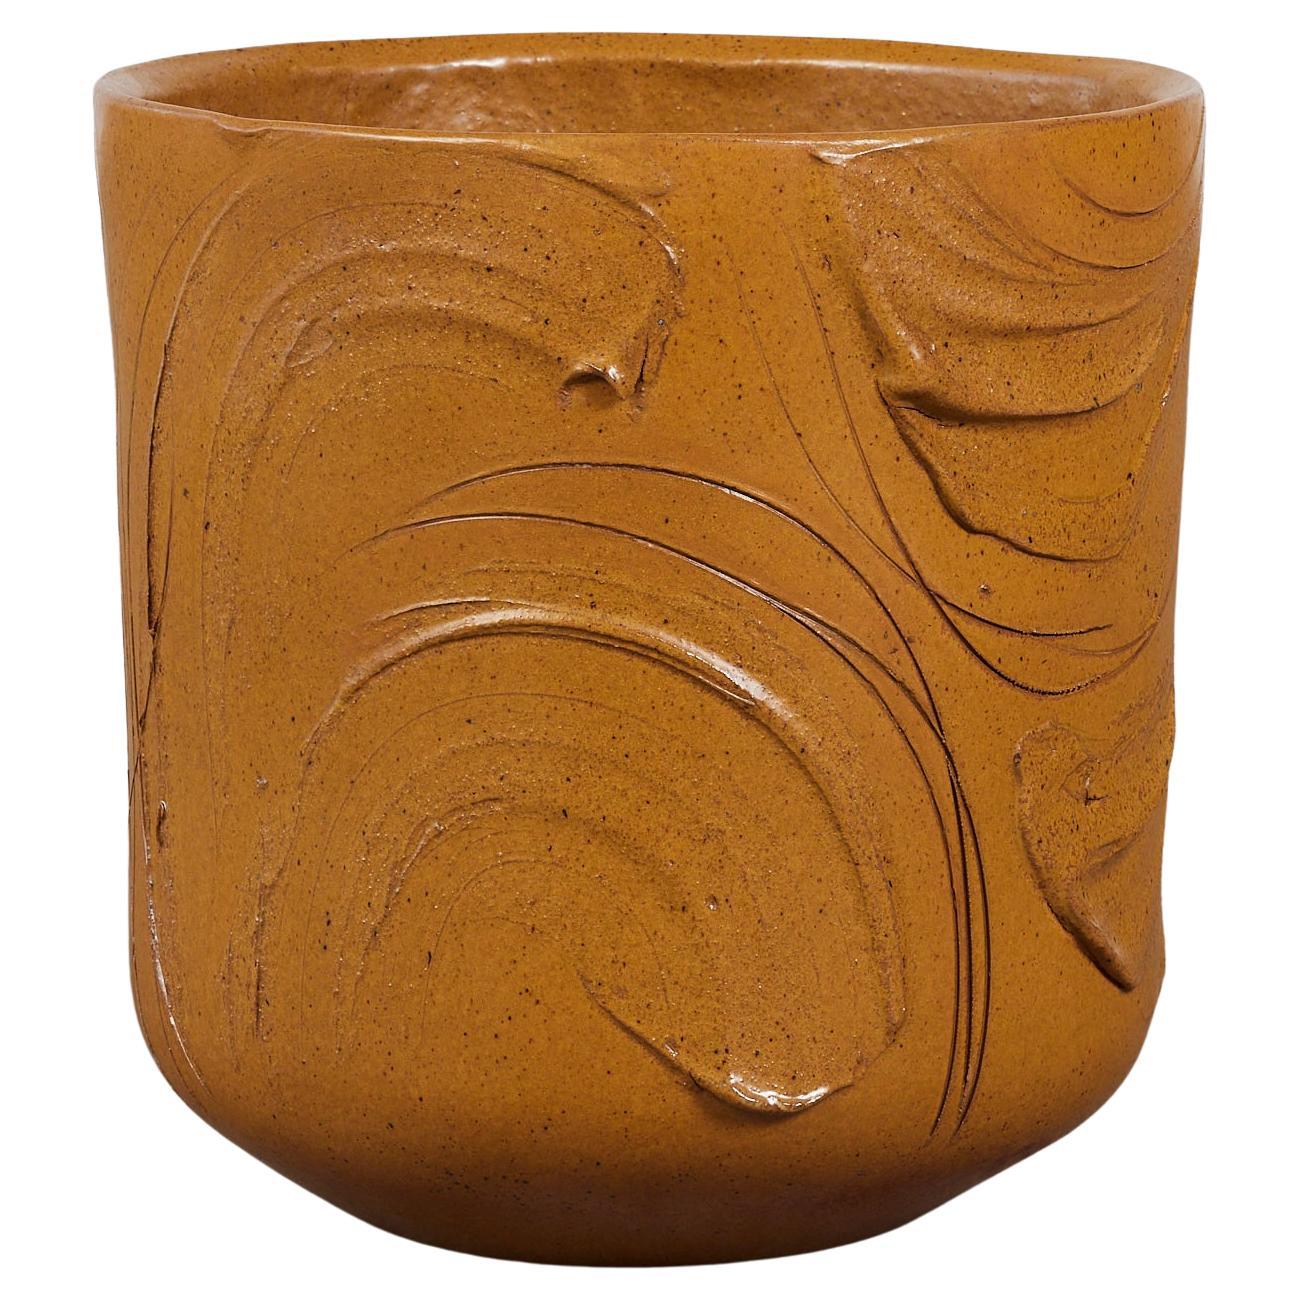 David Cressey "Expressive" Glazed Planter for Architectural Pottery For Sale